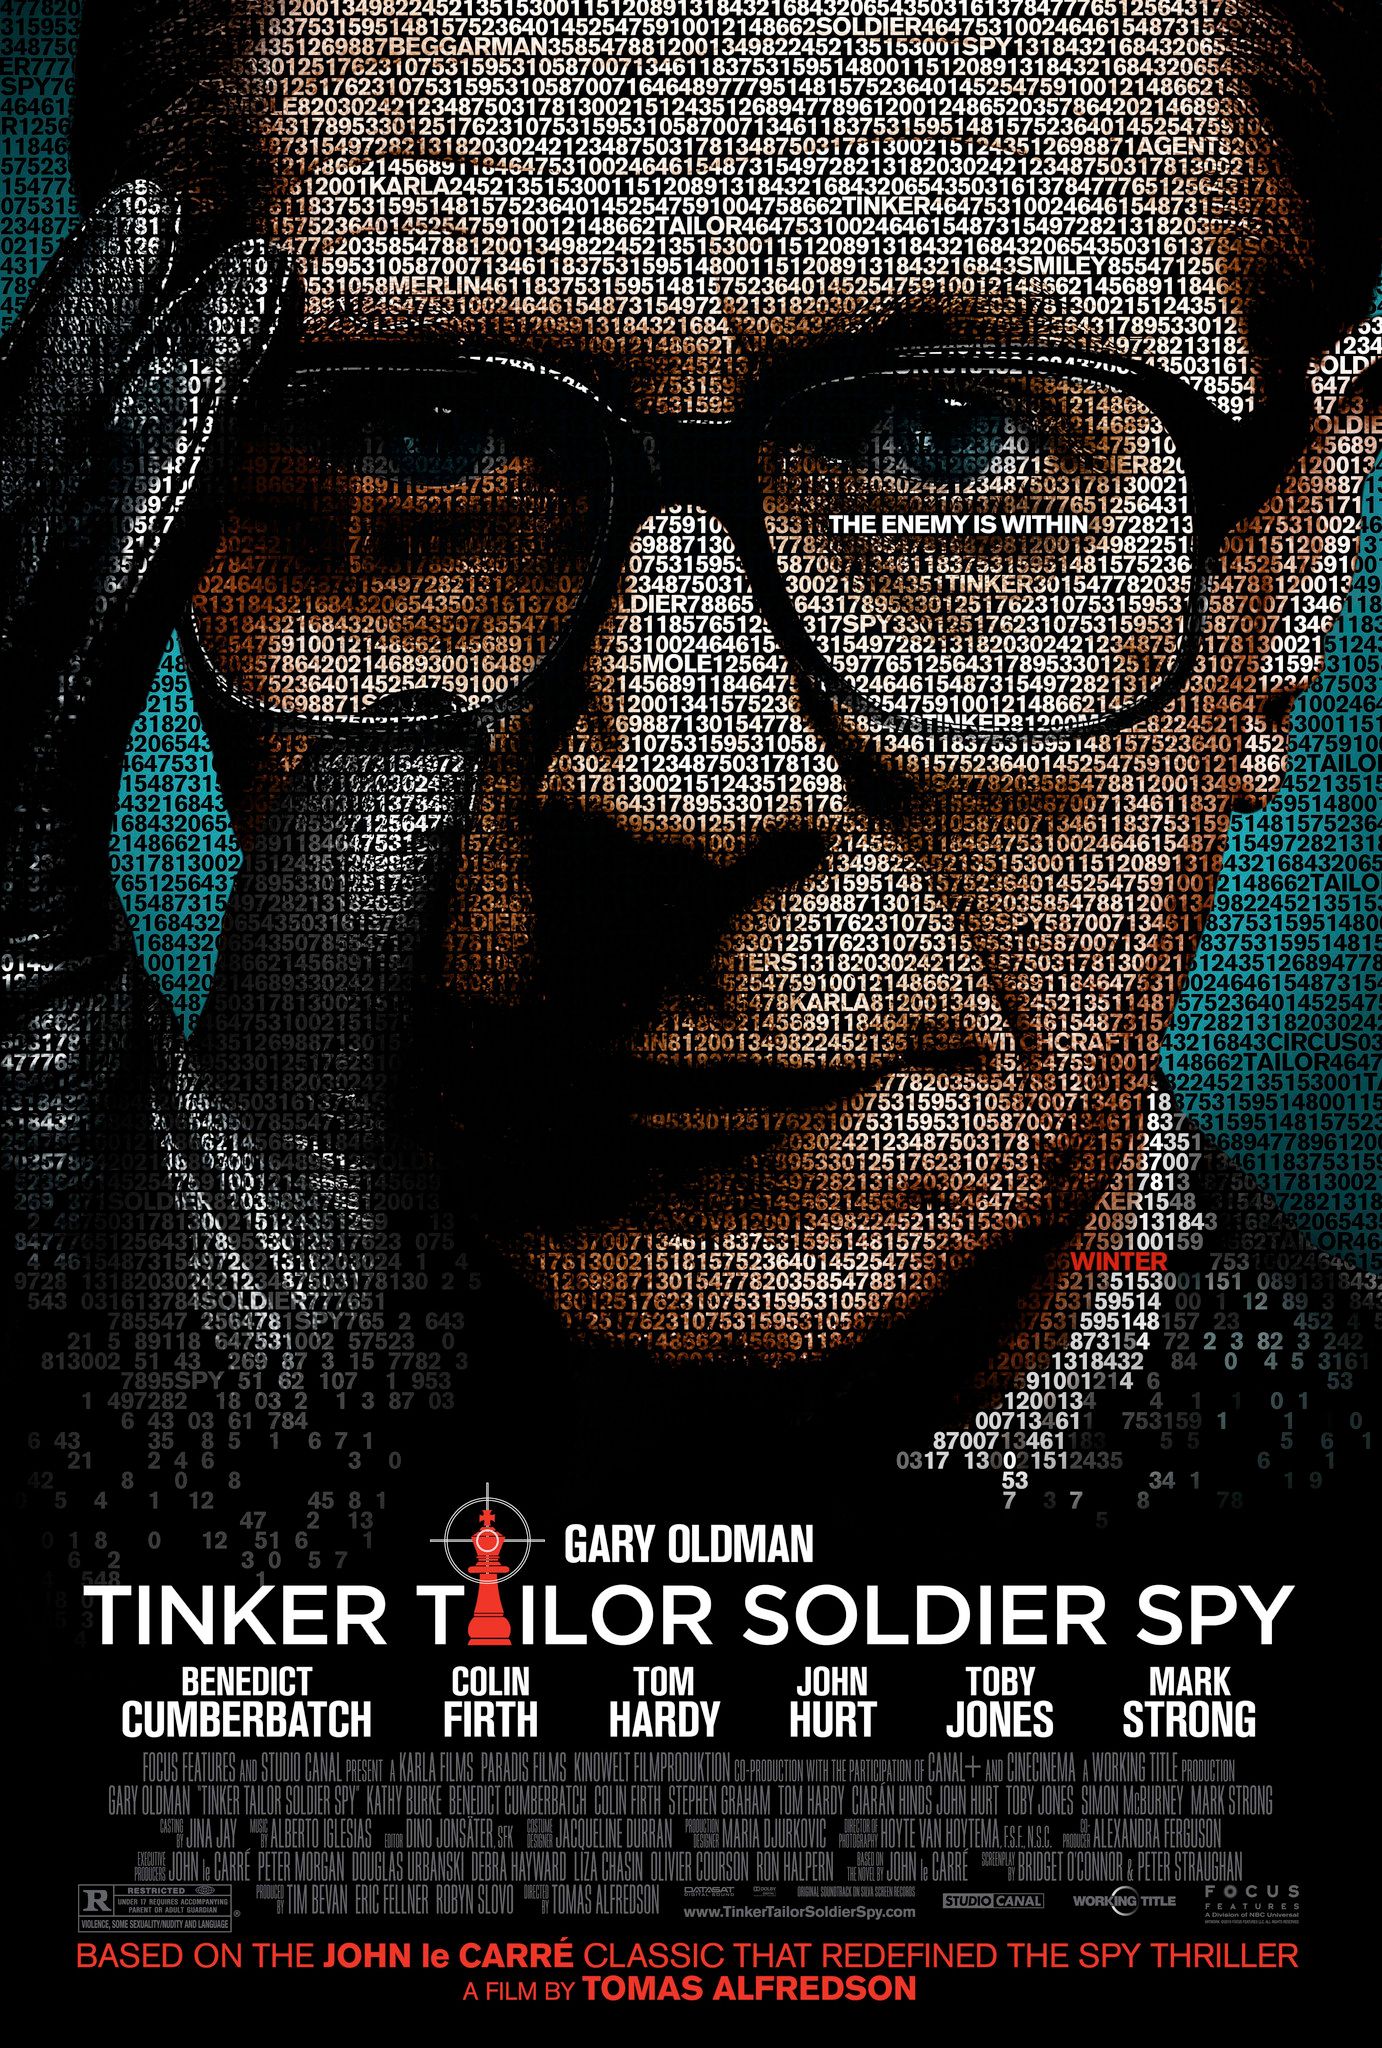 Gary Oldman in a poster for Tinker Tailor Soldier Spy